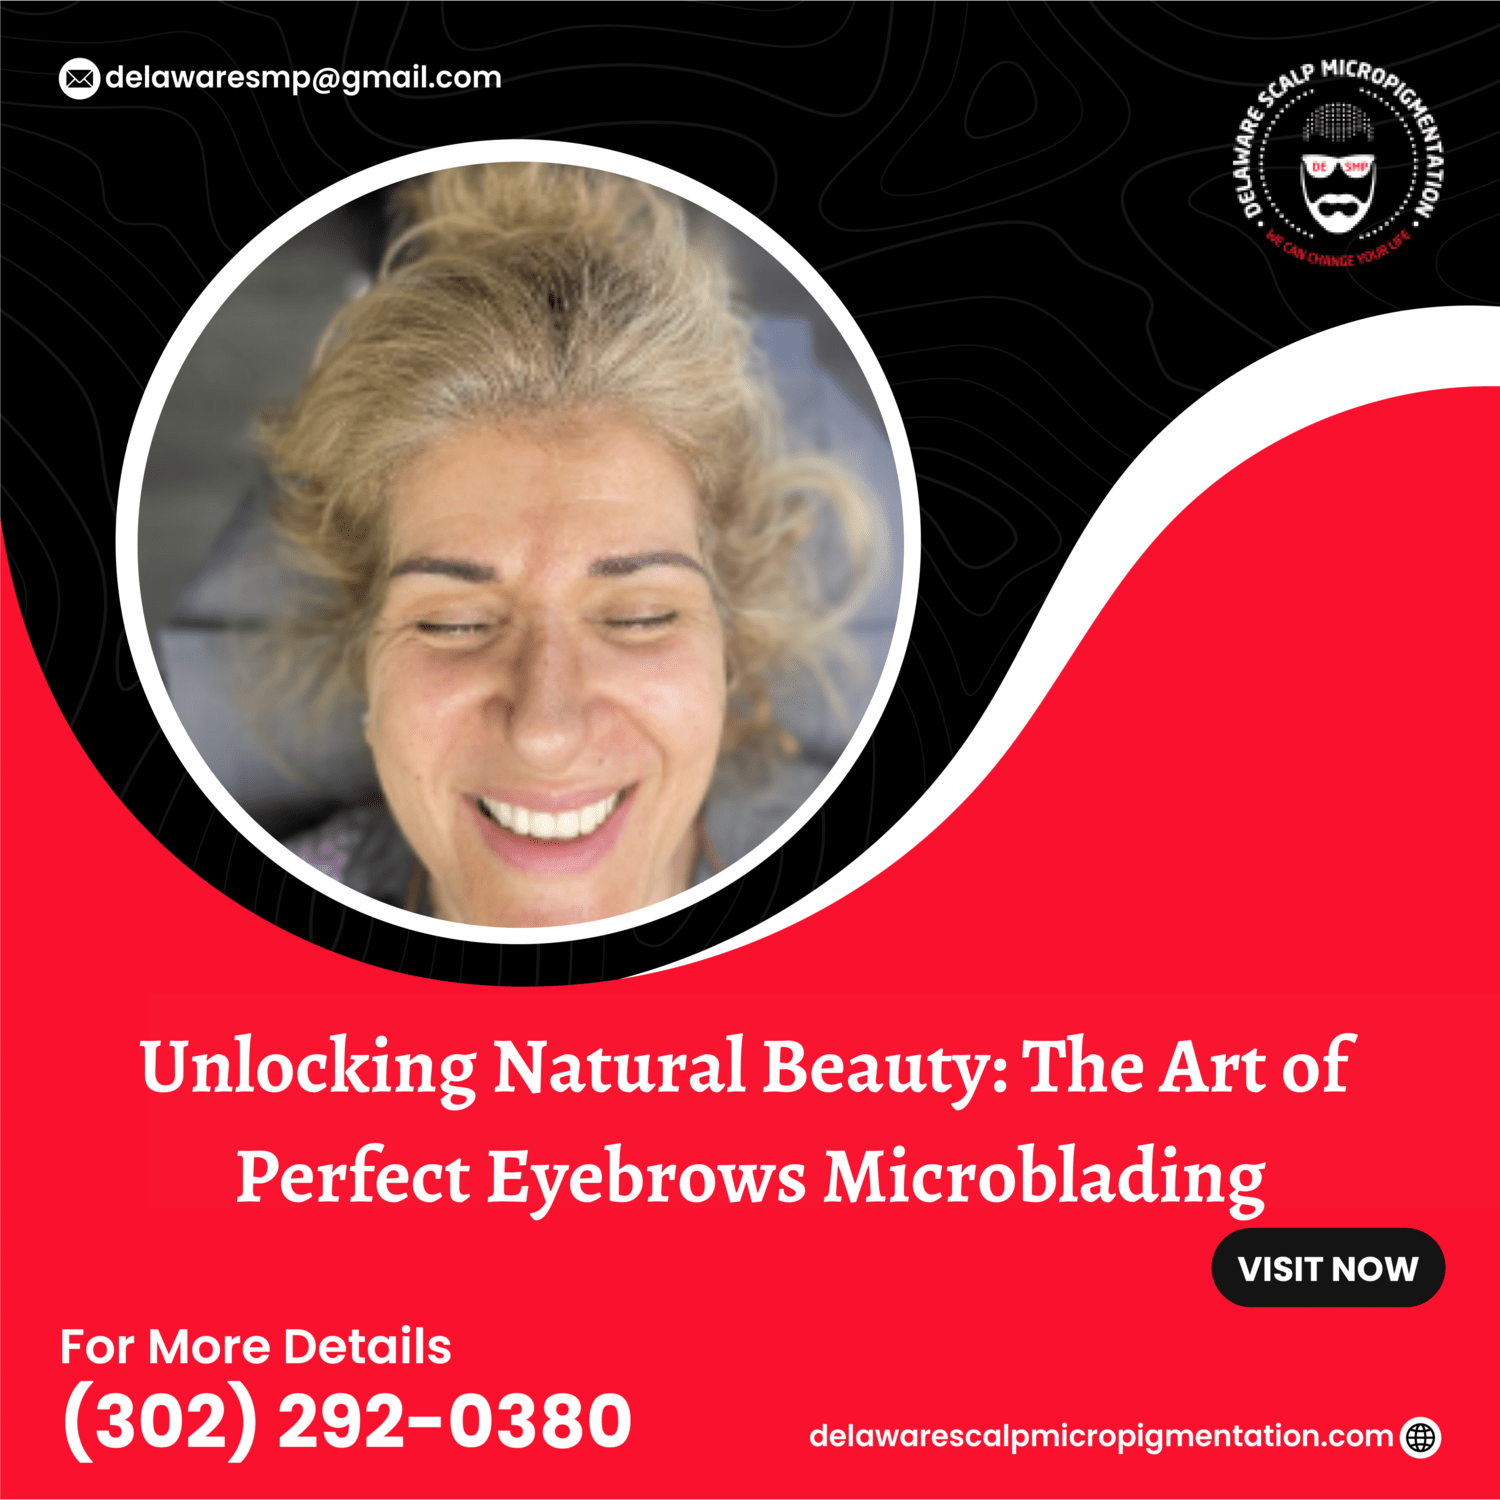 Unlocking Natural Beauty: The Art of Perfect Eyebrows Microblading